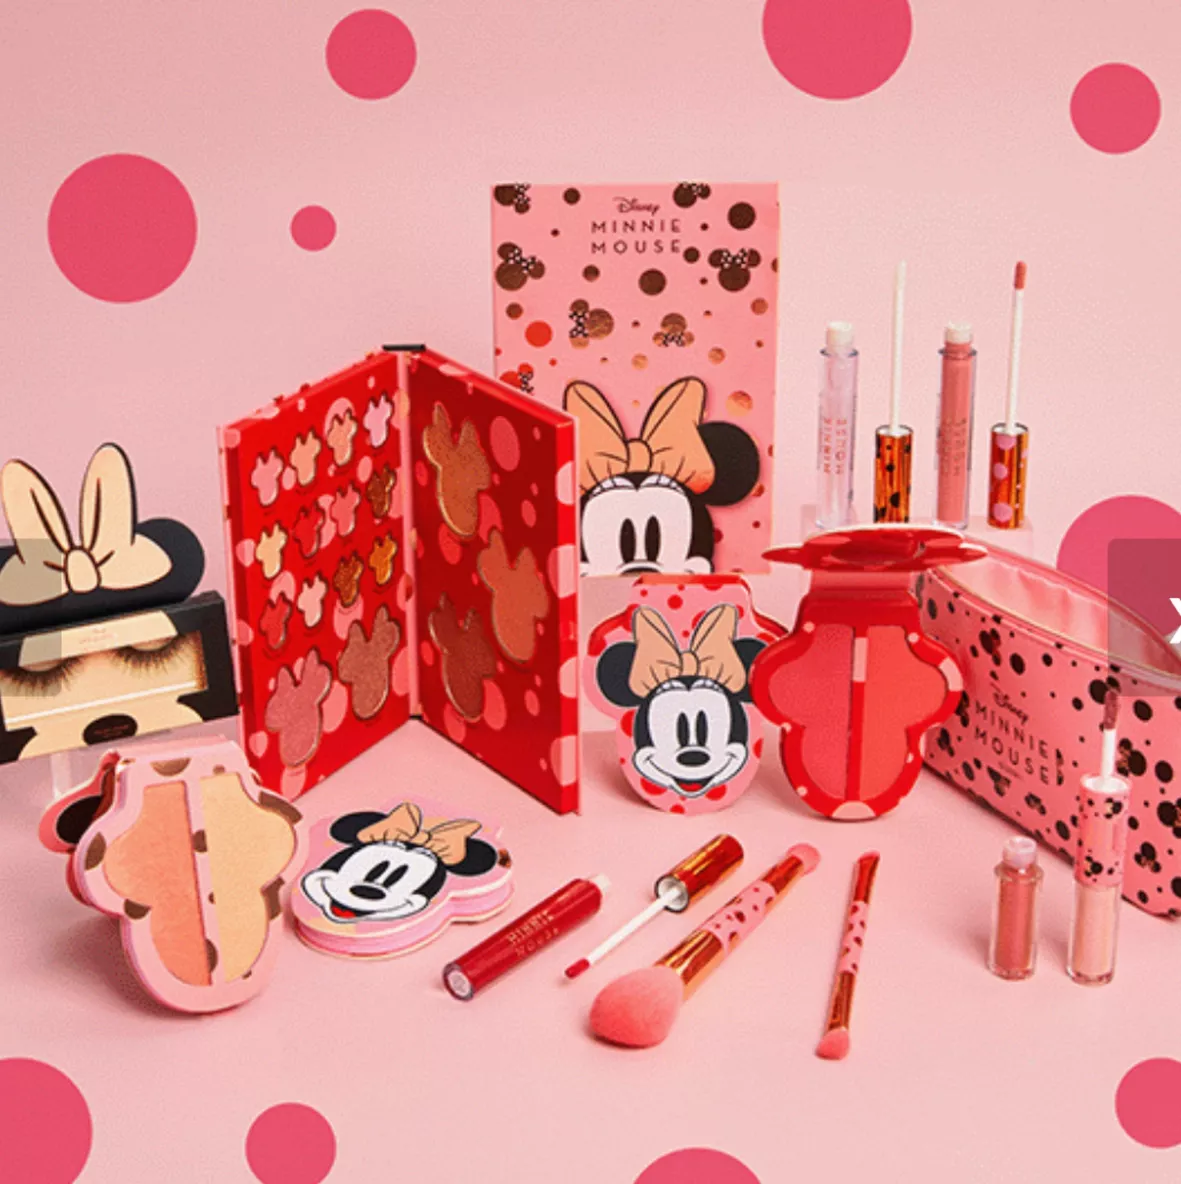 Cream Minnie Mouse ears curated on LTK